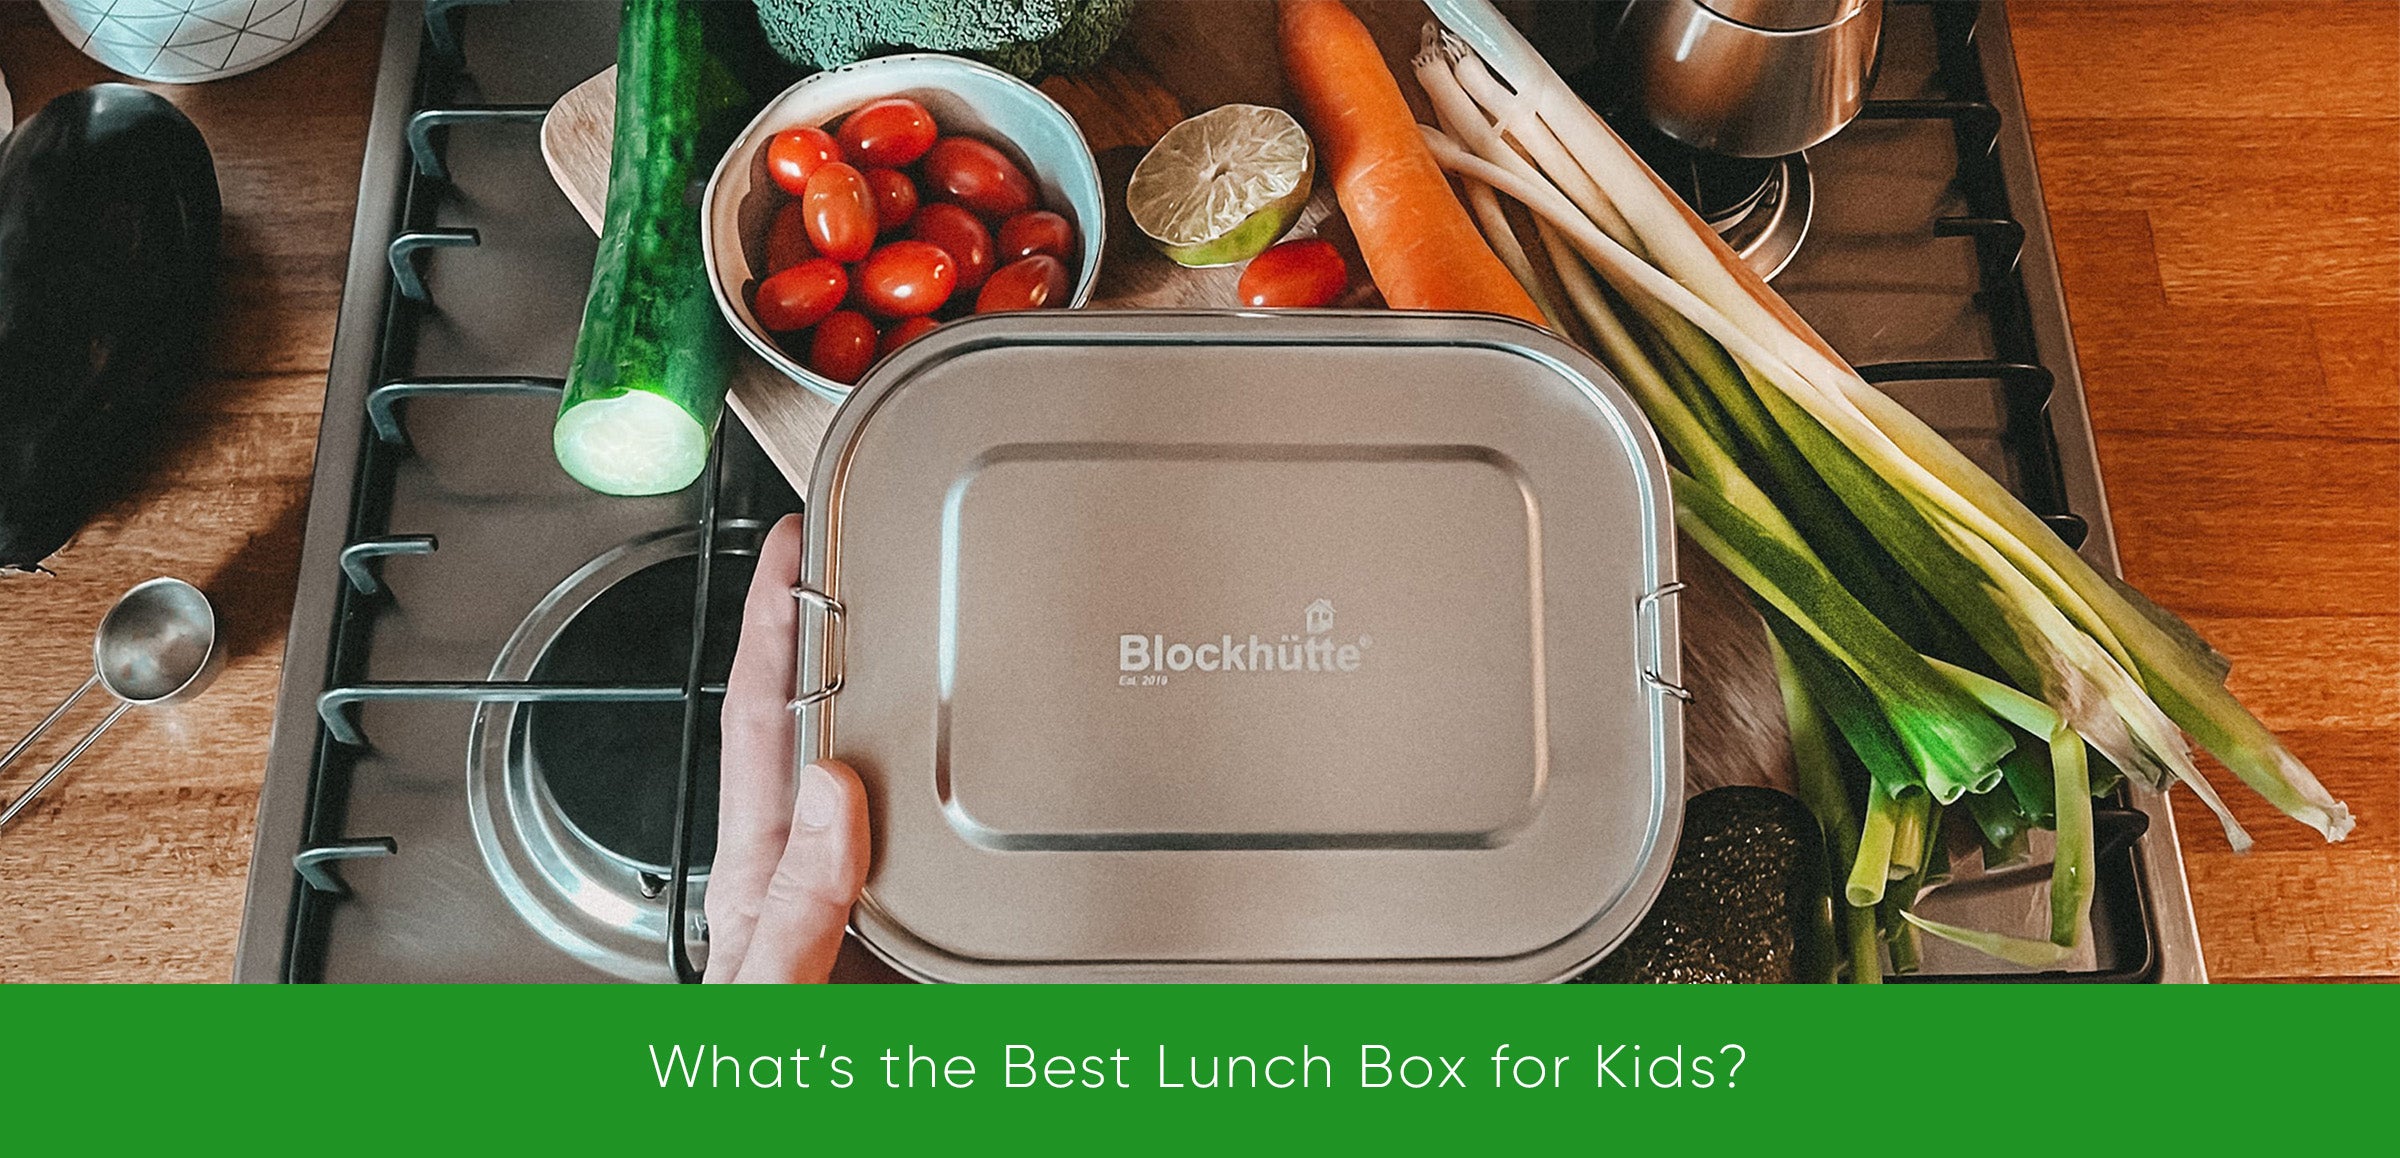 Blockhuette stainless steel lunch box for kids surrounded by vegetabls